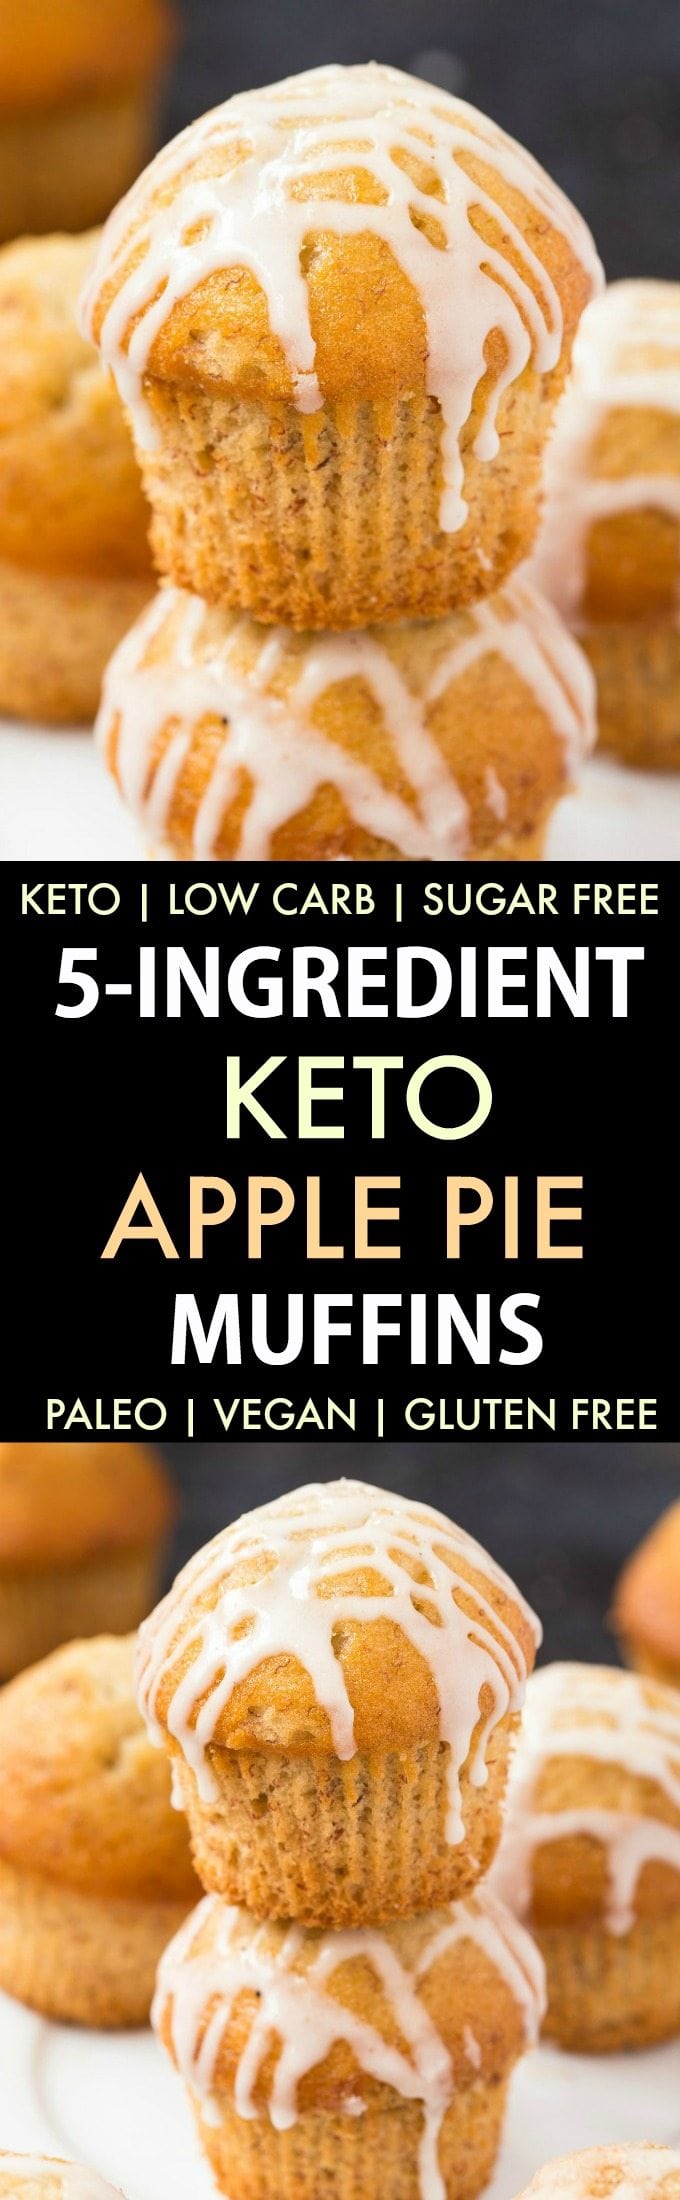 5-Ingredient Low Carb Apple Pie Muffins (Keto, Paleo, Vegan, Sugar Free)- Fluffy bakery style apple pie muffins using 5 ingredients and made with NO eggs and NO sugar- The ultimate guilt-free snack or dessert! #ketobaking #ketorecipe #lowcarbrecipes #protein | Recipe on thebigmansworld.com